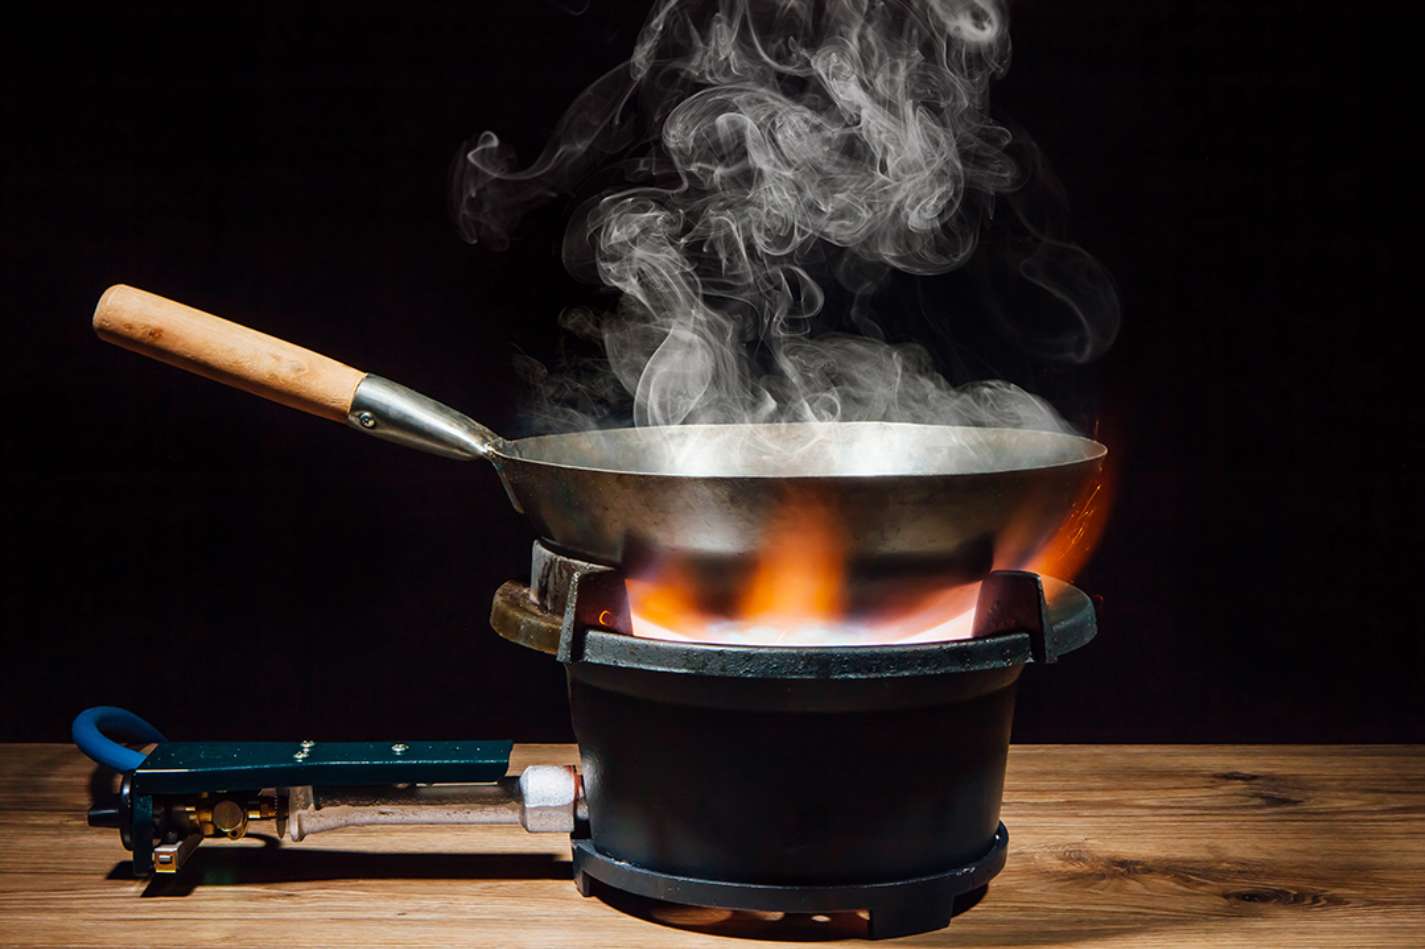 Seven things that cause your pans to smoke